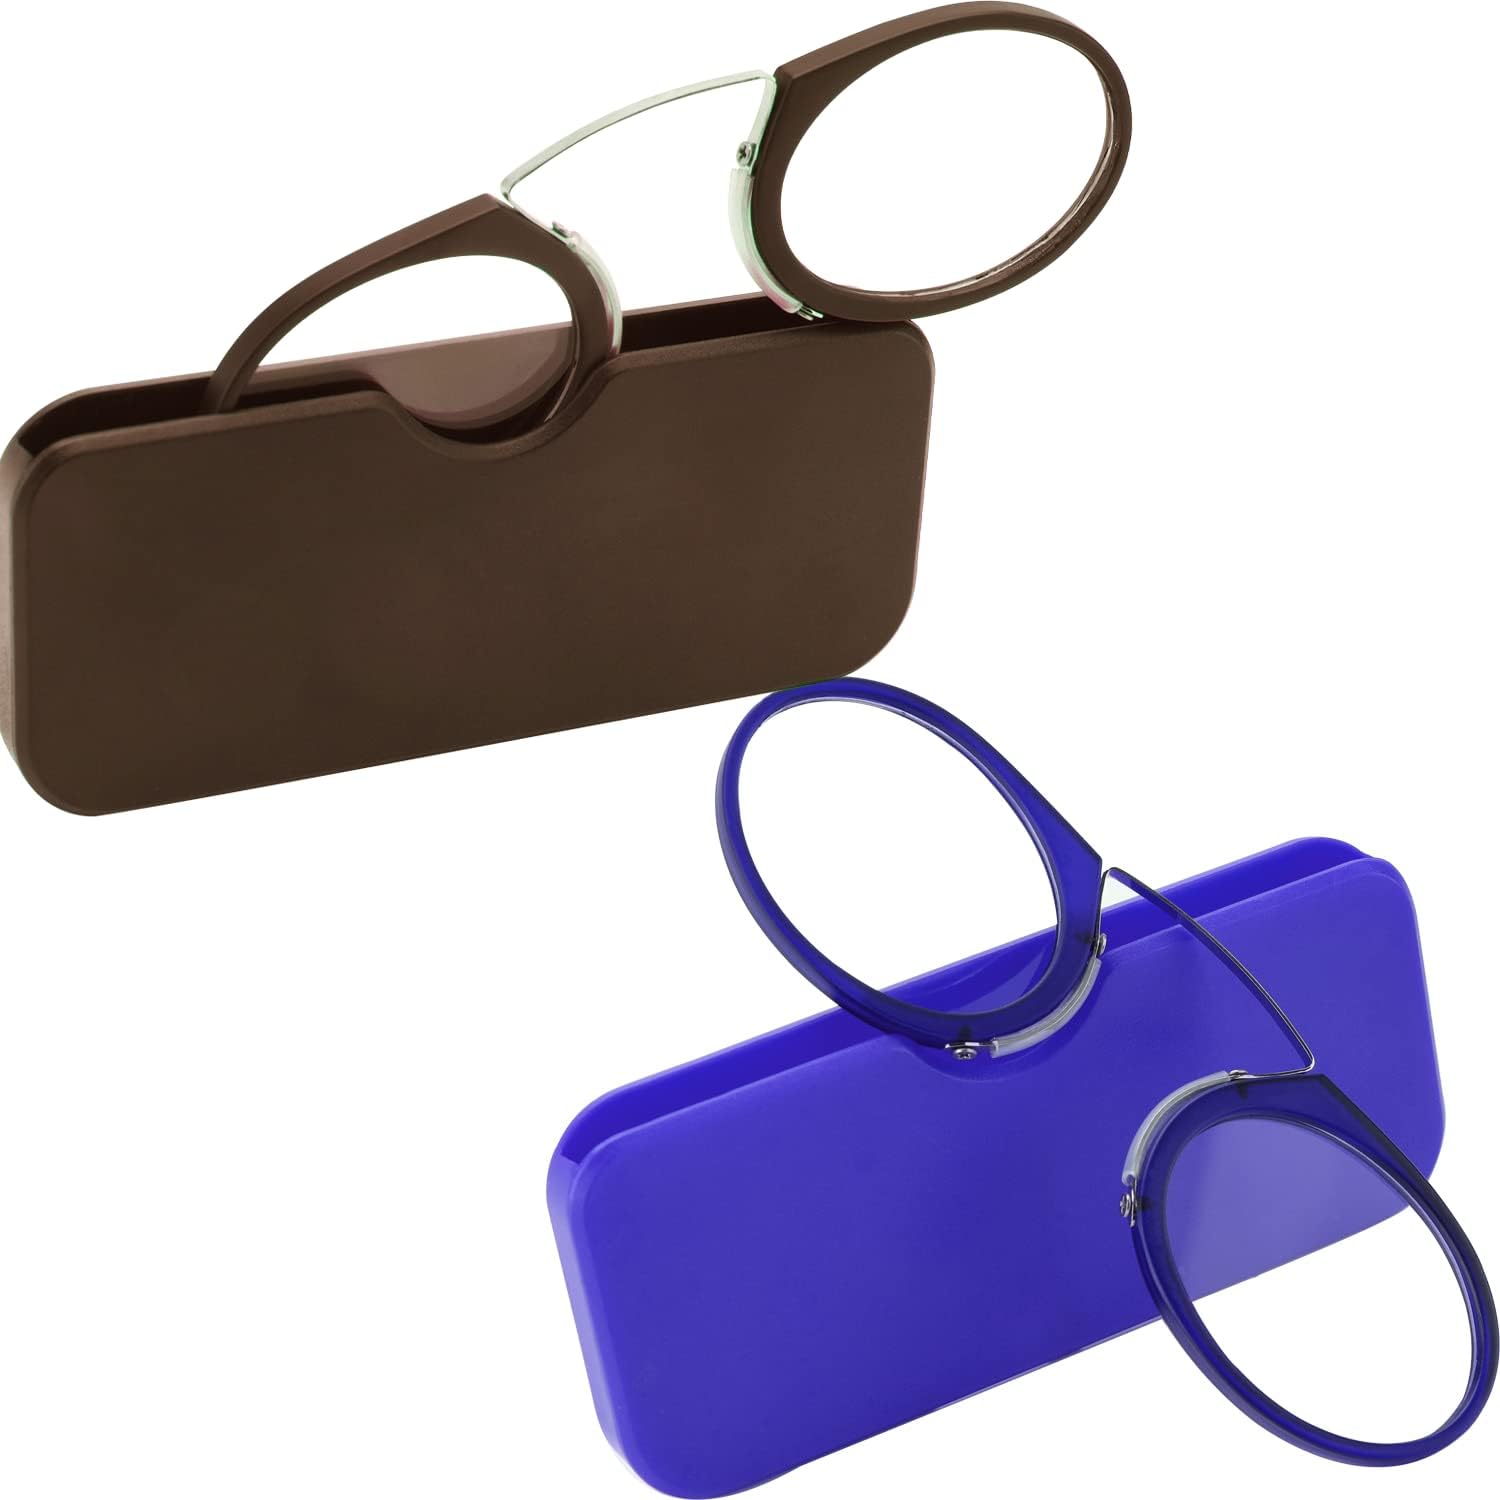 Magnifying glasses without temples | visual acuity 2.5 | various colors